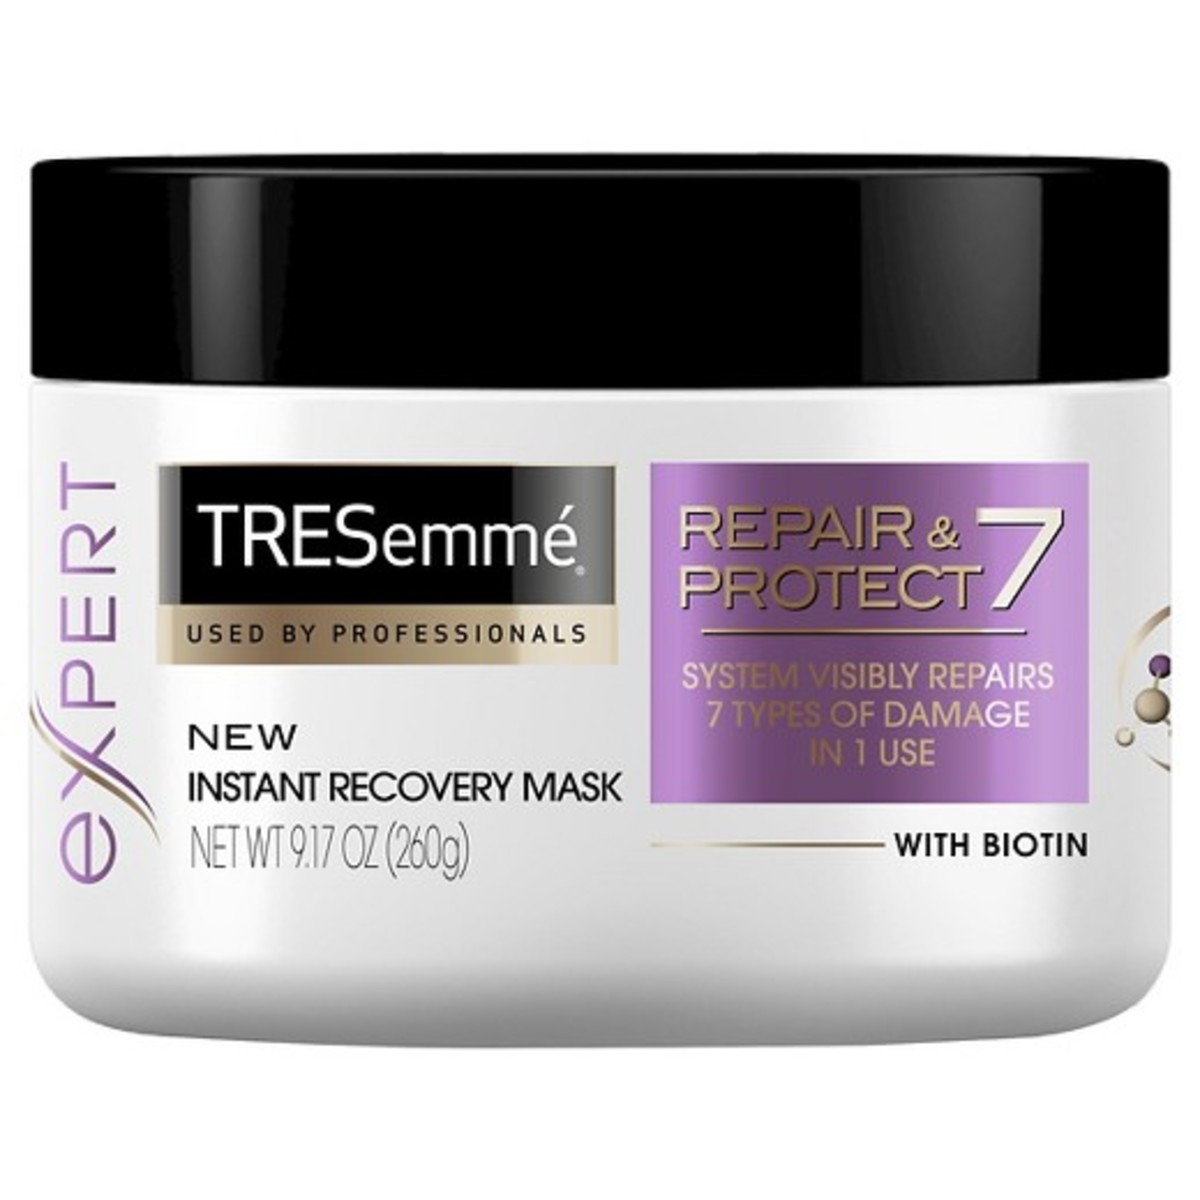 Tresemmé Expert Repair & Protect Instant Recovery Mask, $4.99, available here.